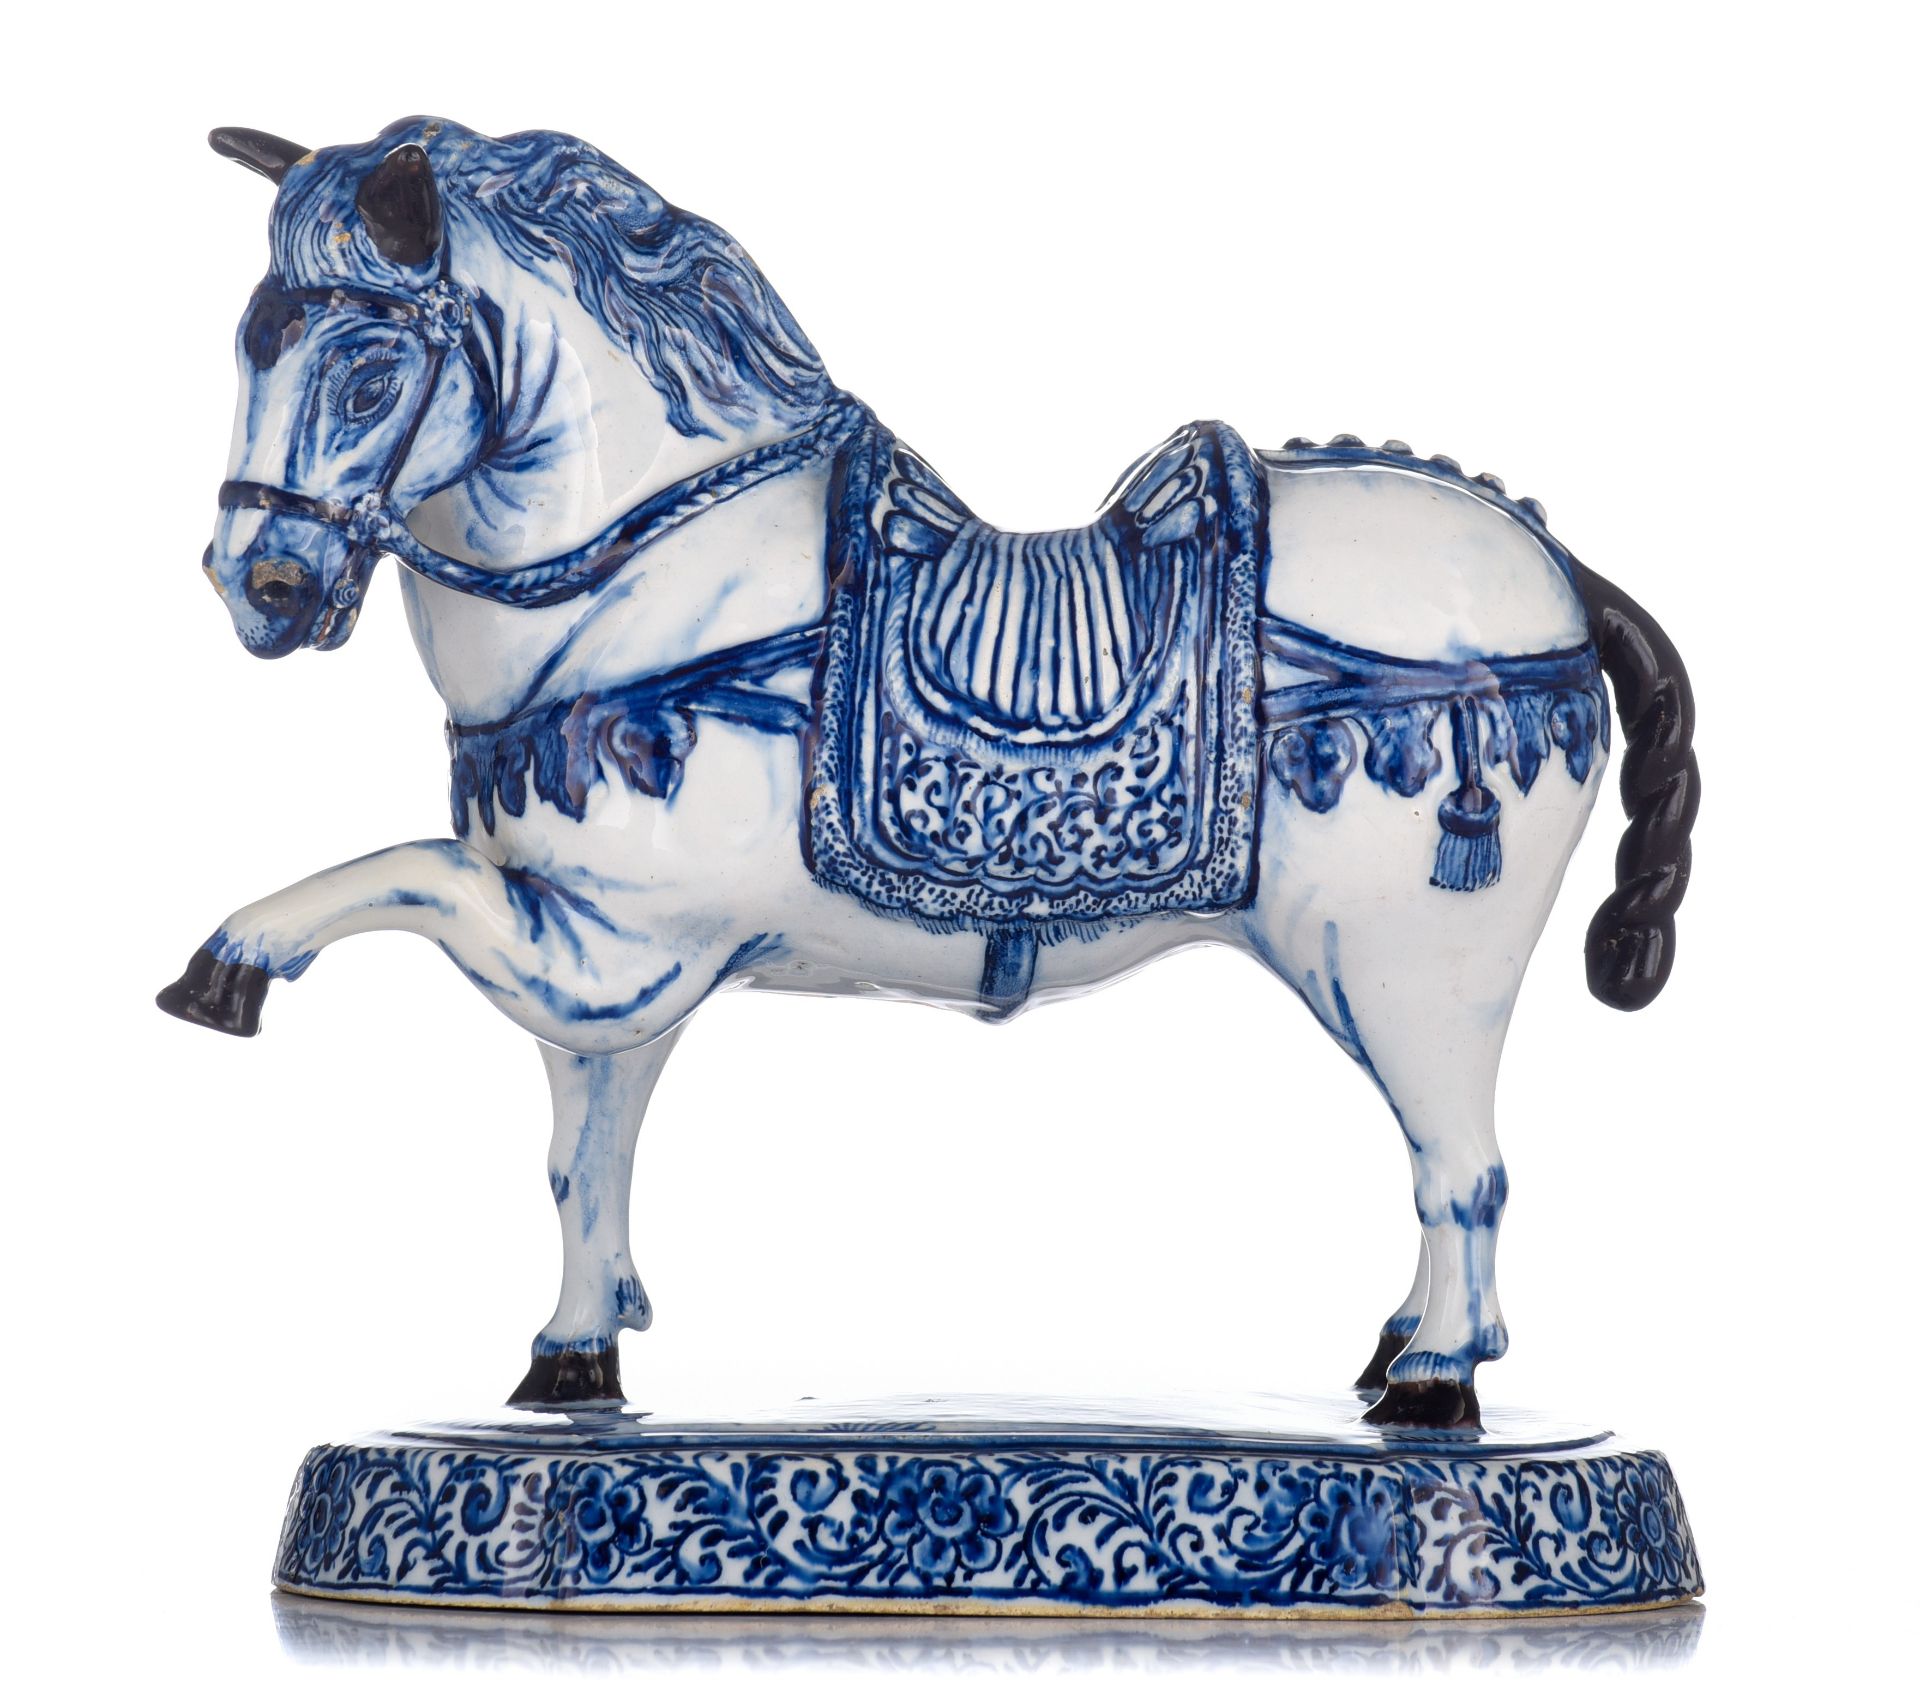 A large Delft blue and white figure of a circus horse, marked Jacob van der Kool, early 18thC, H 23